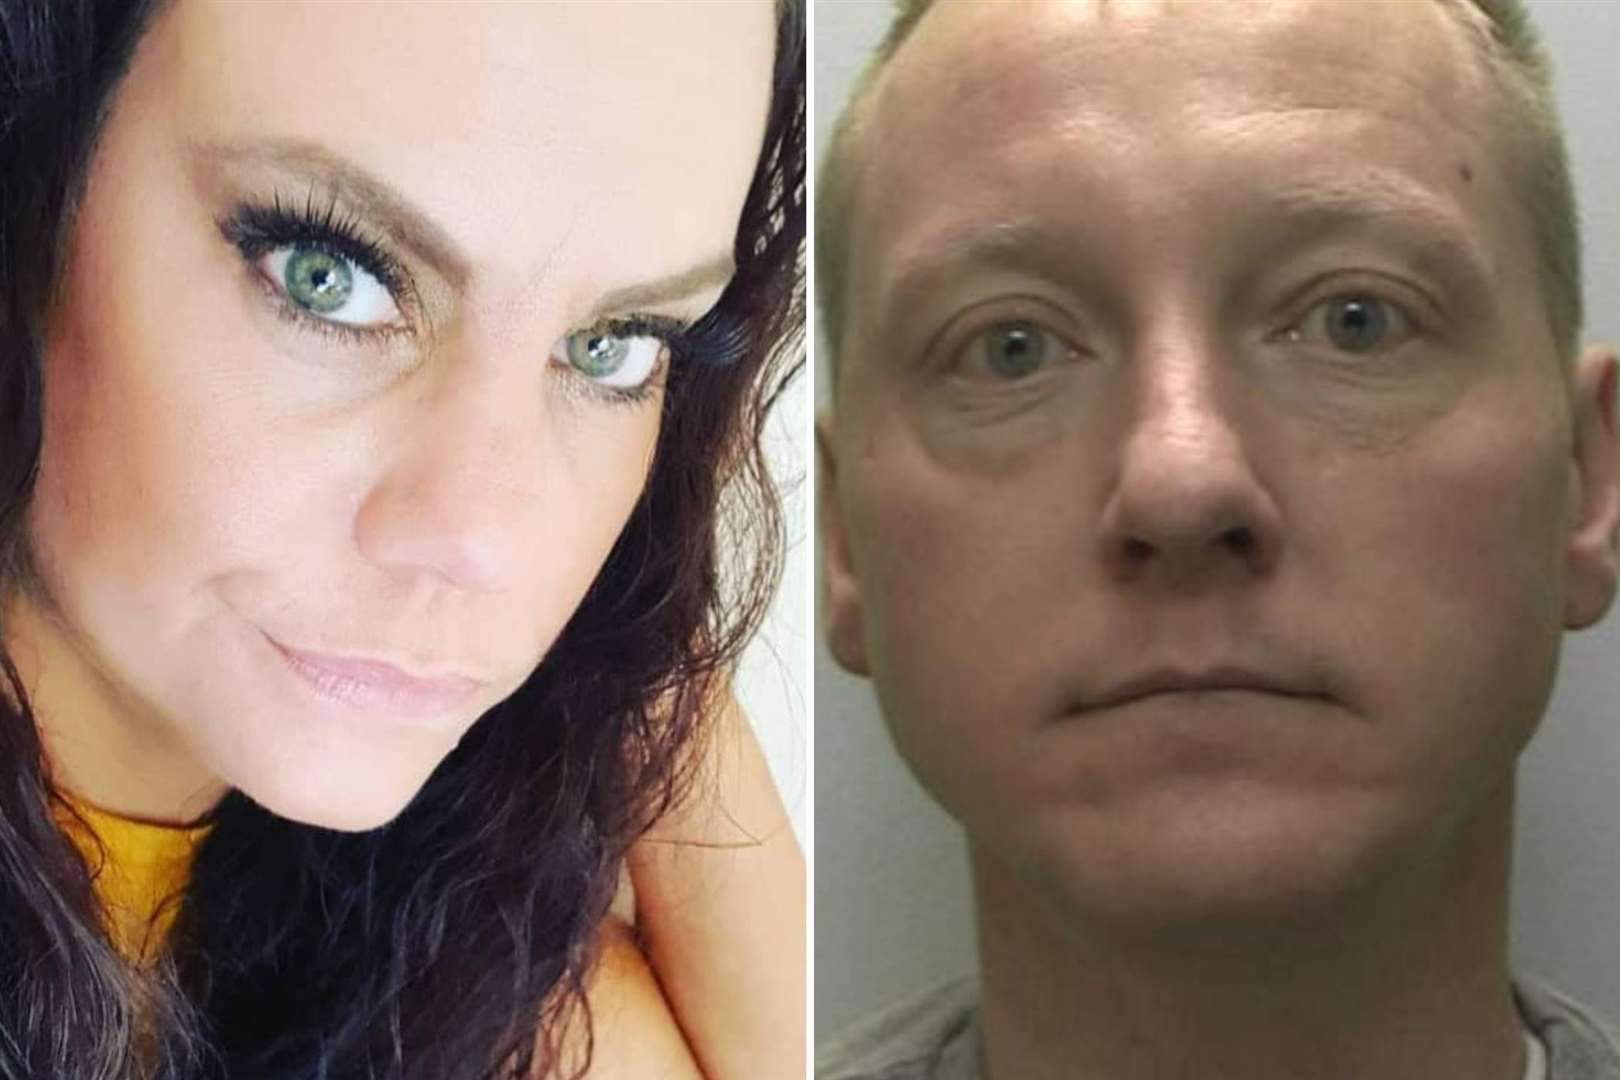 Aimie Willsea and Jason Fox were jailed for child sexual abuse offences